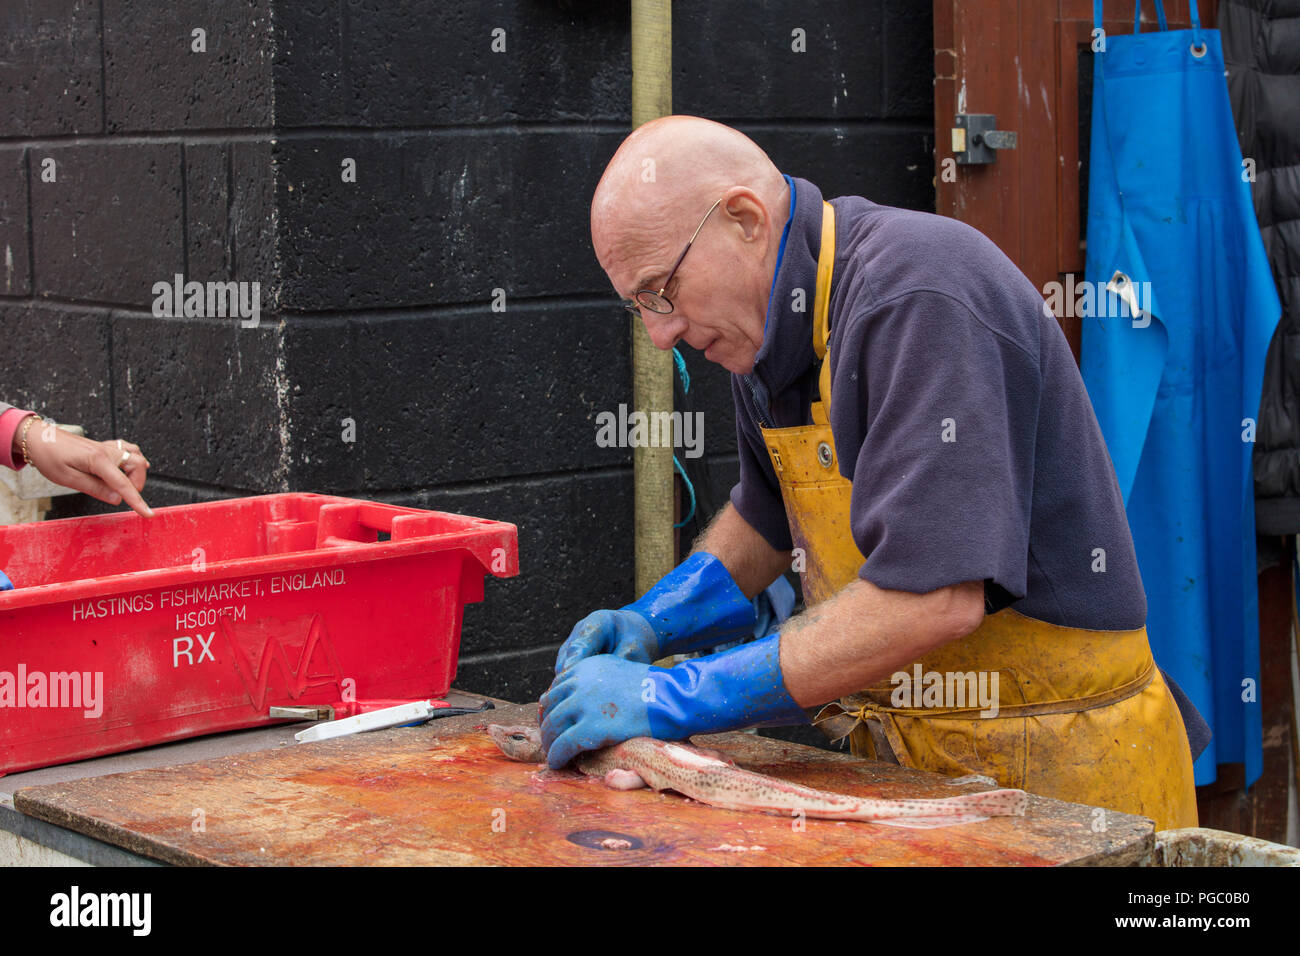 Expert, sole trader fishmonger, sells, prepares spotted cat shark on Hastings beach fish market. Curious bystander points into a red container. Stock Photo